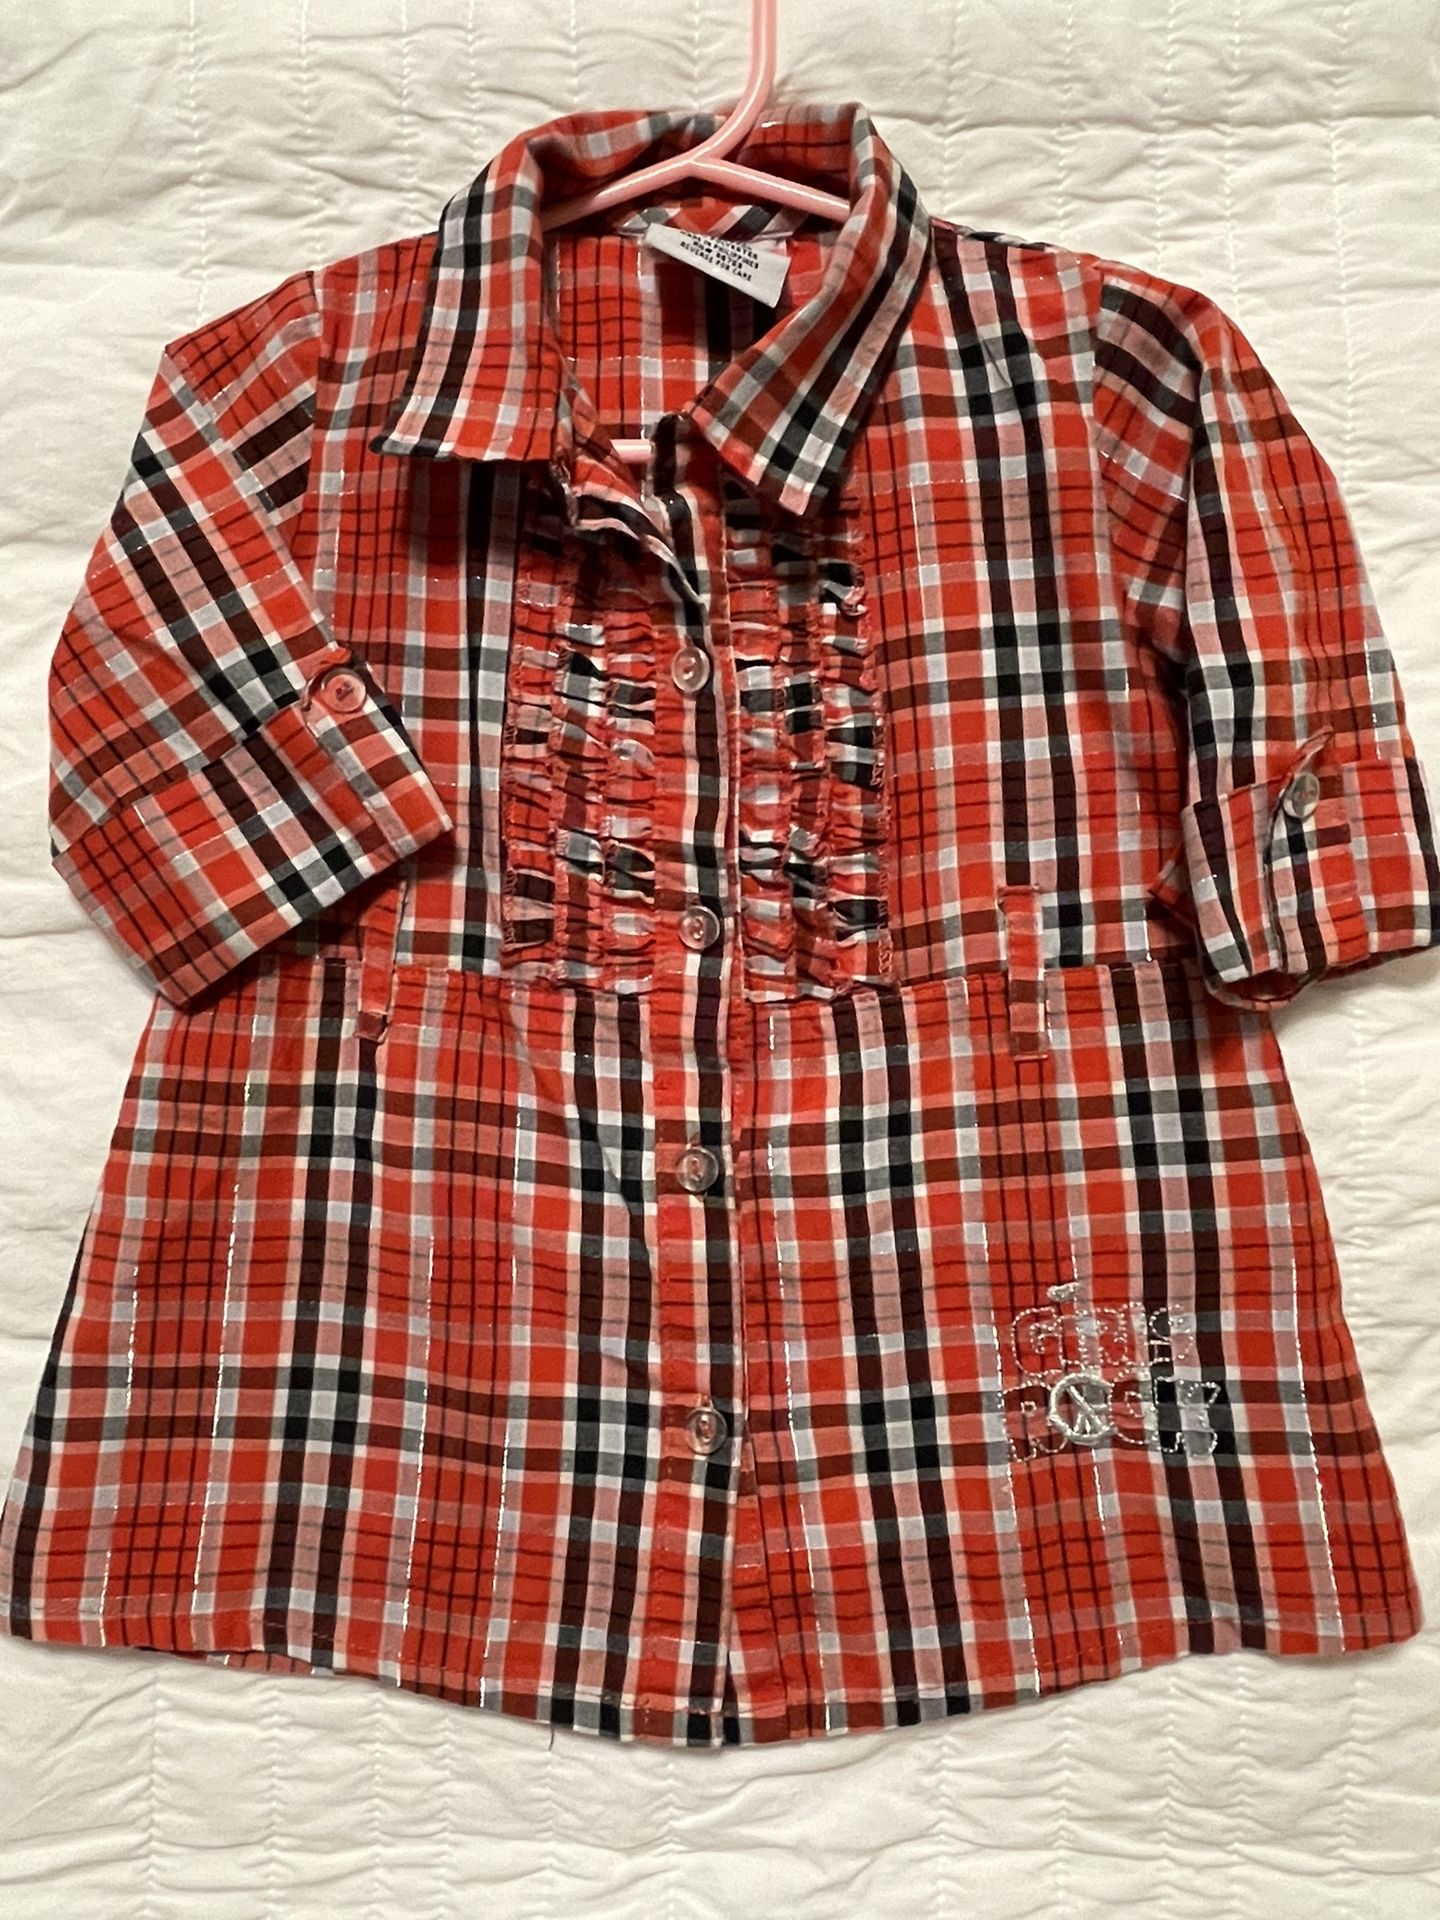 2B Real “Girls Rock” Red Plaid Buttoned Toddler Shirt Size 2T